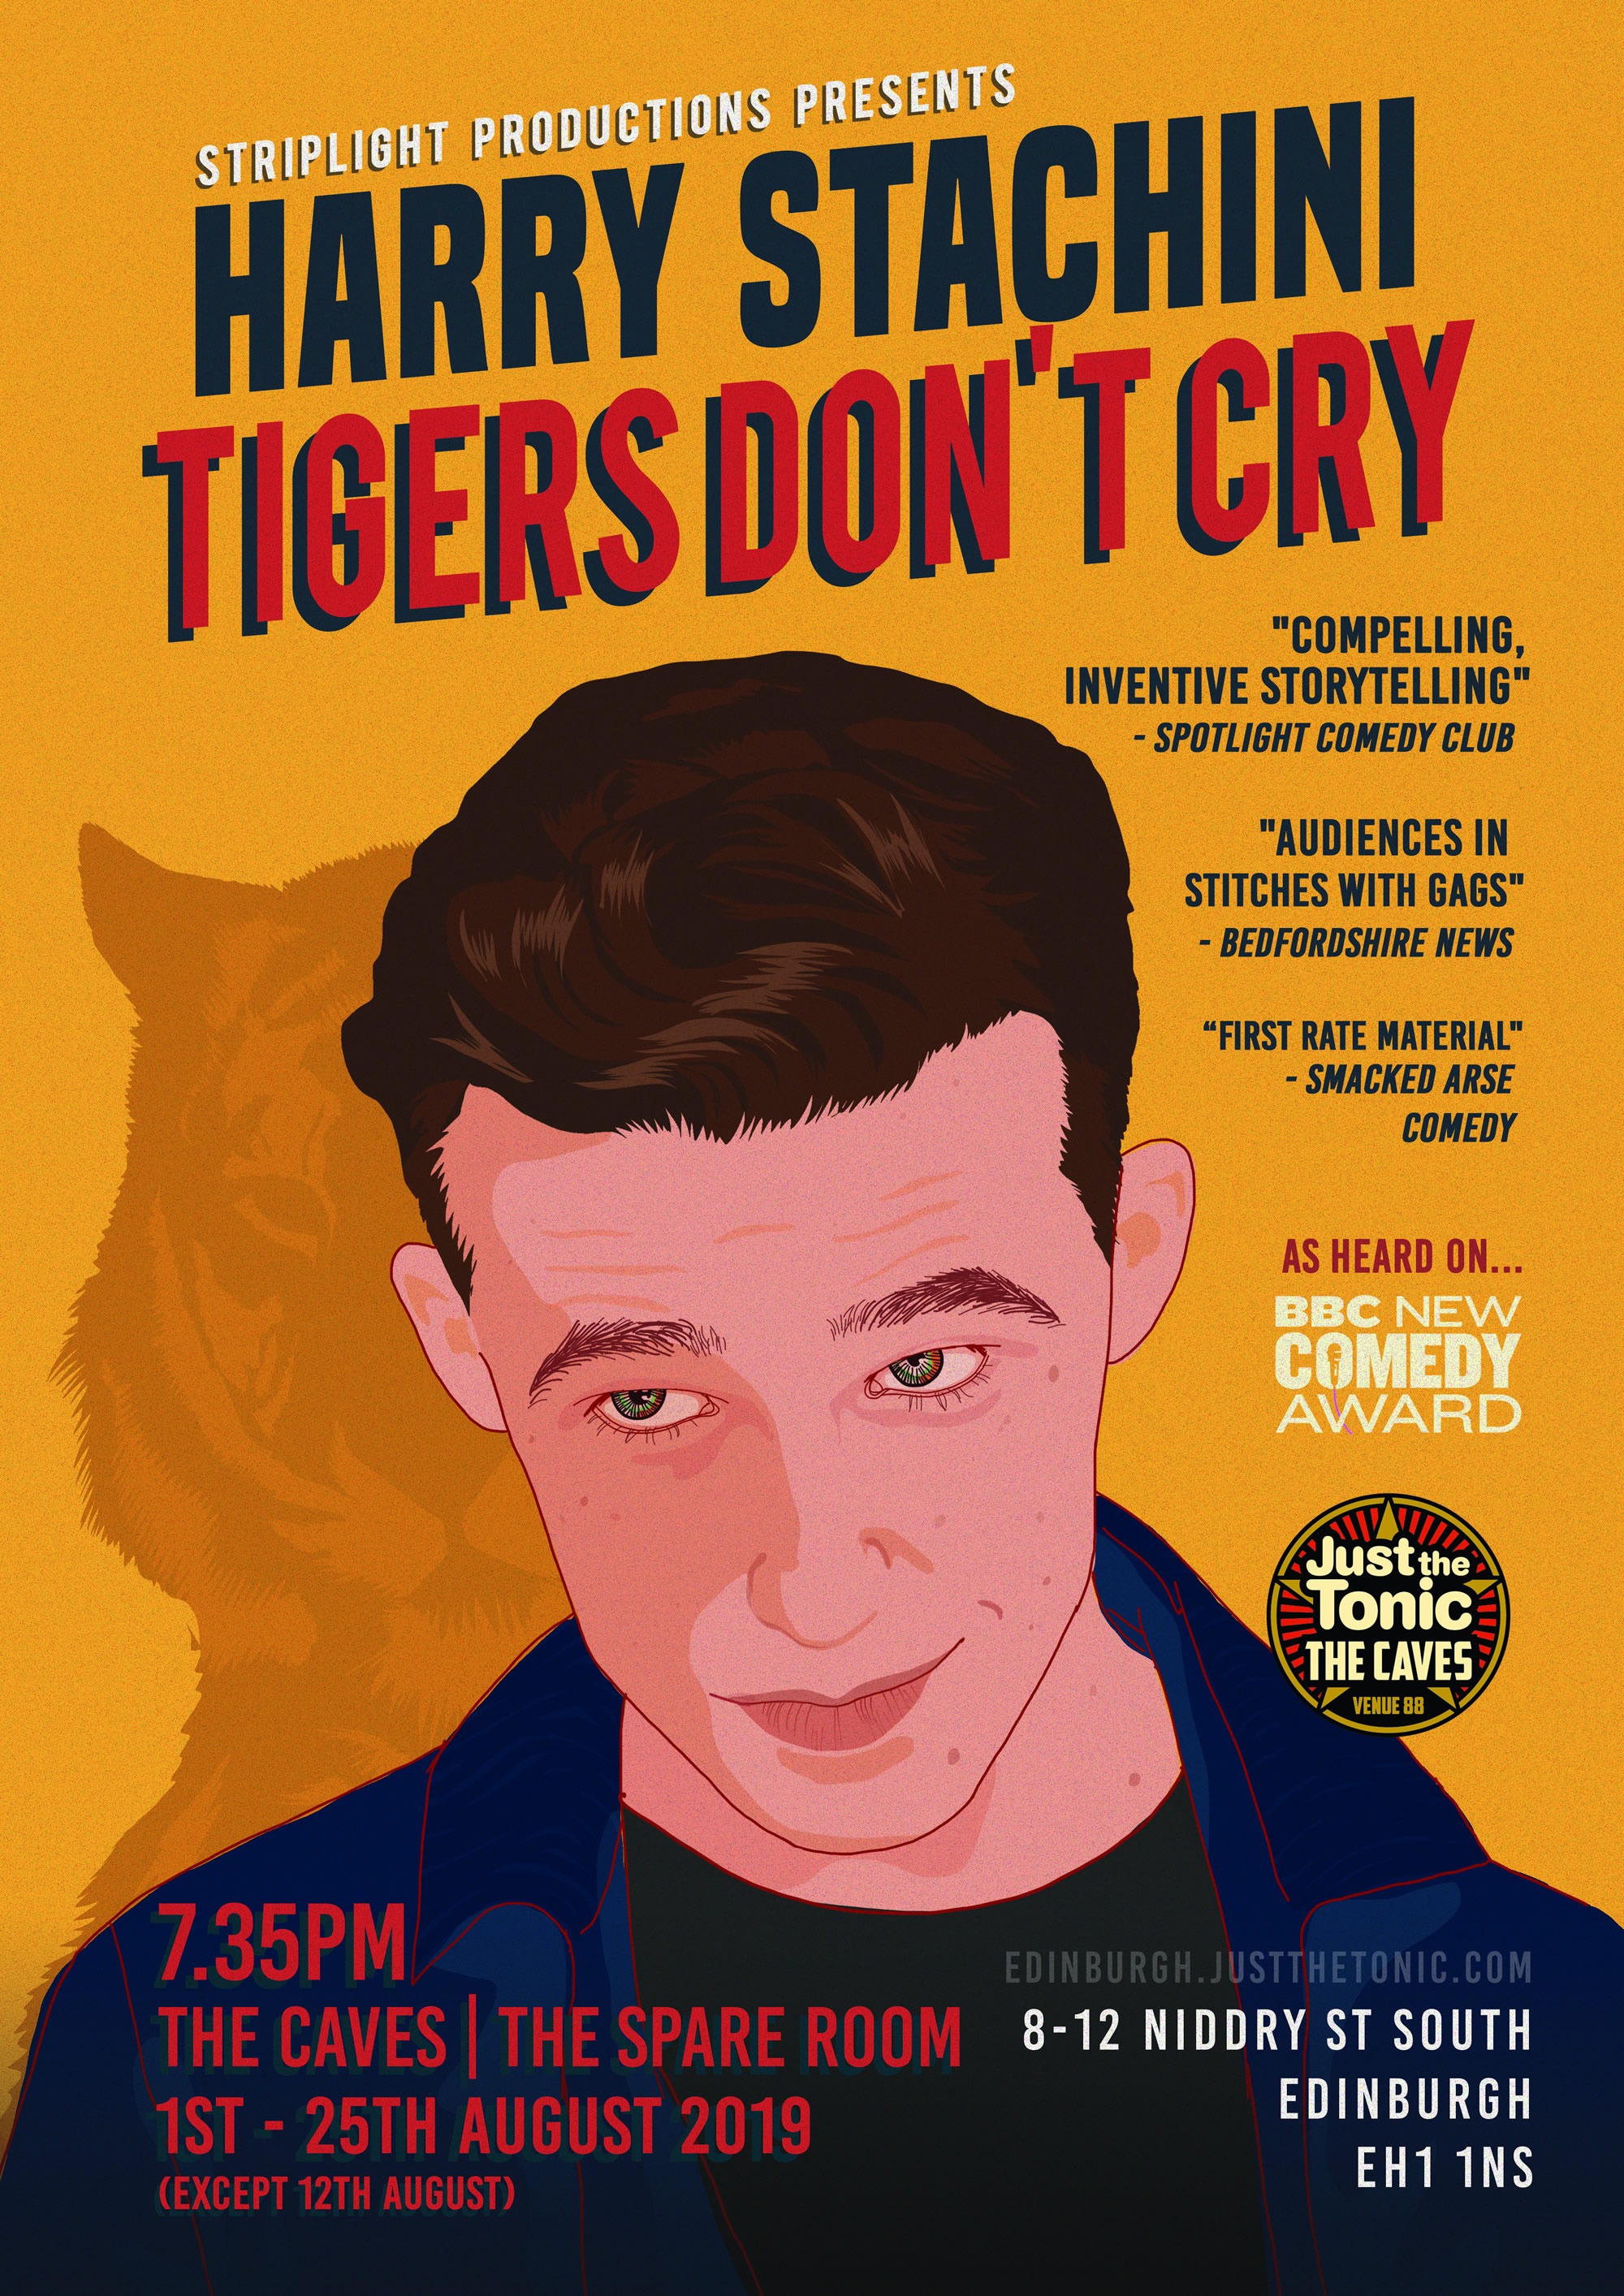 The poster for Harry Stachini - Tigers Don't Cry